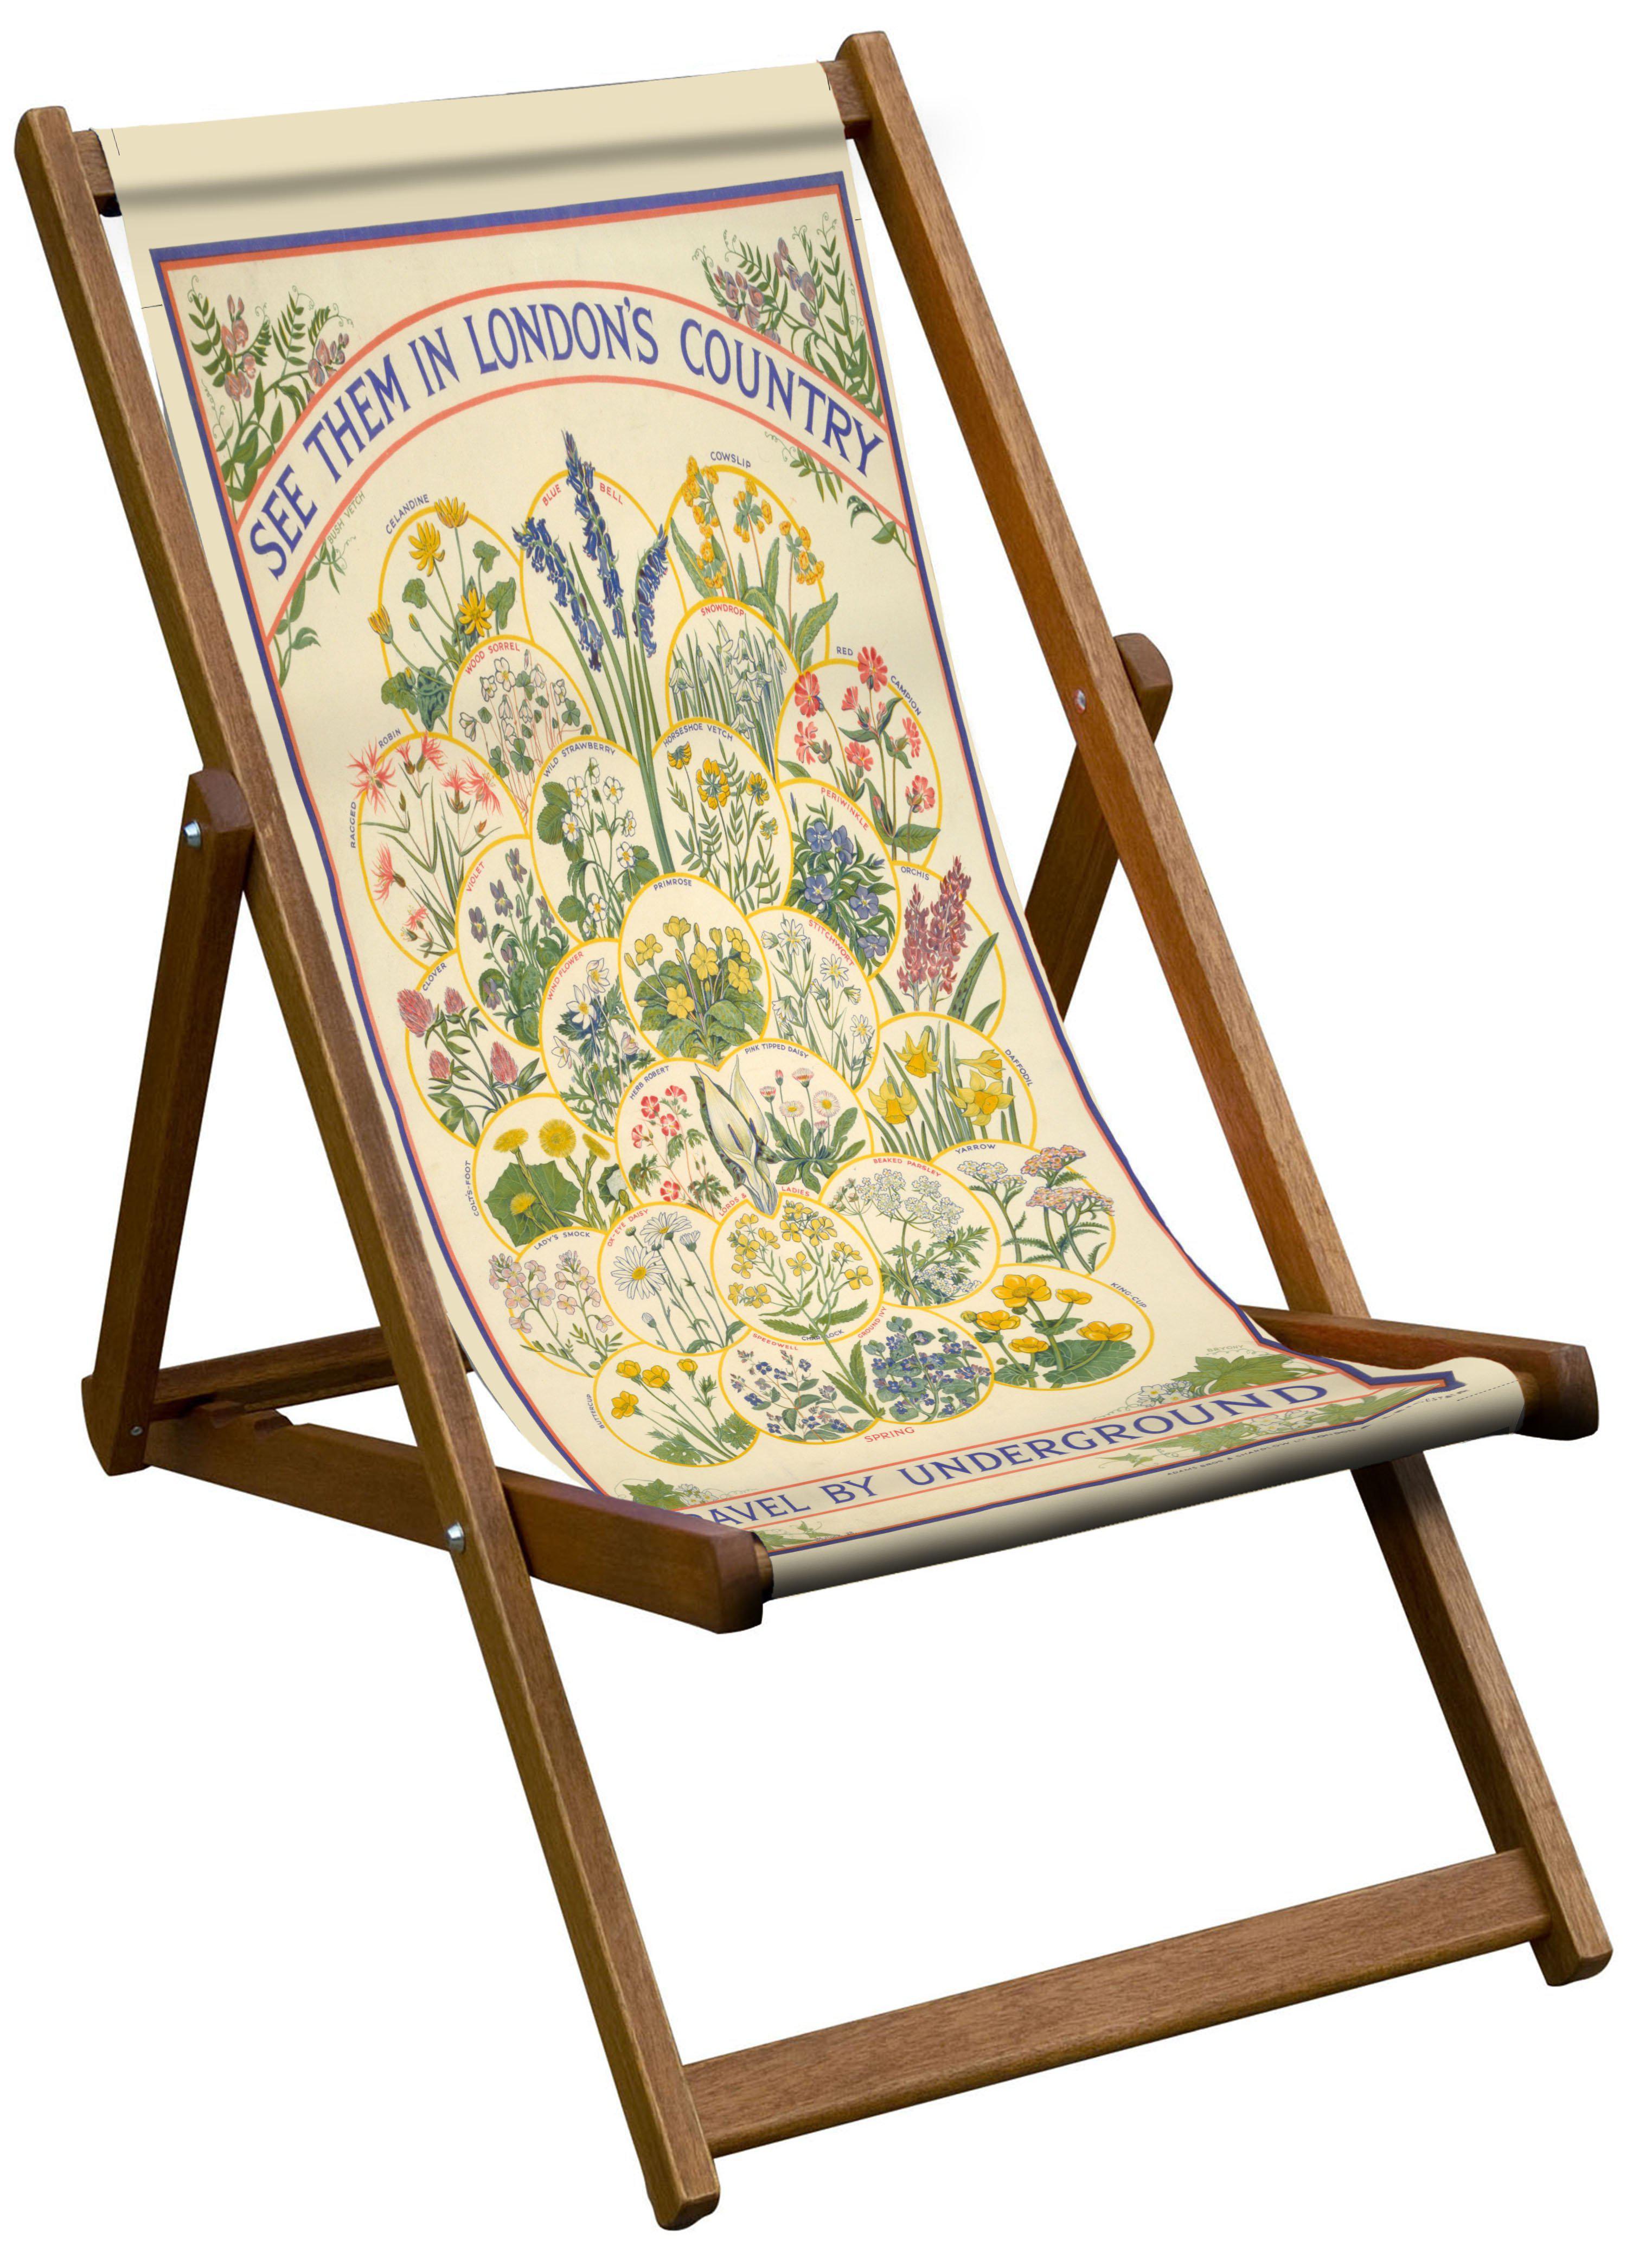 See Them In London's Country - London Transport Deckchair